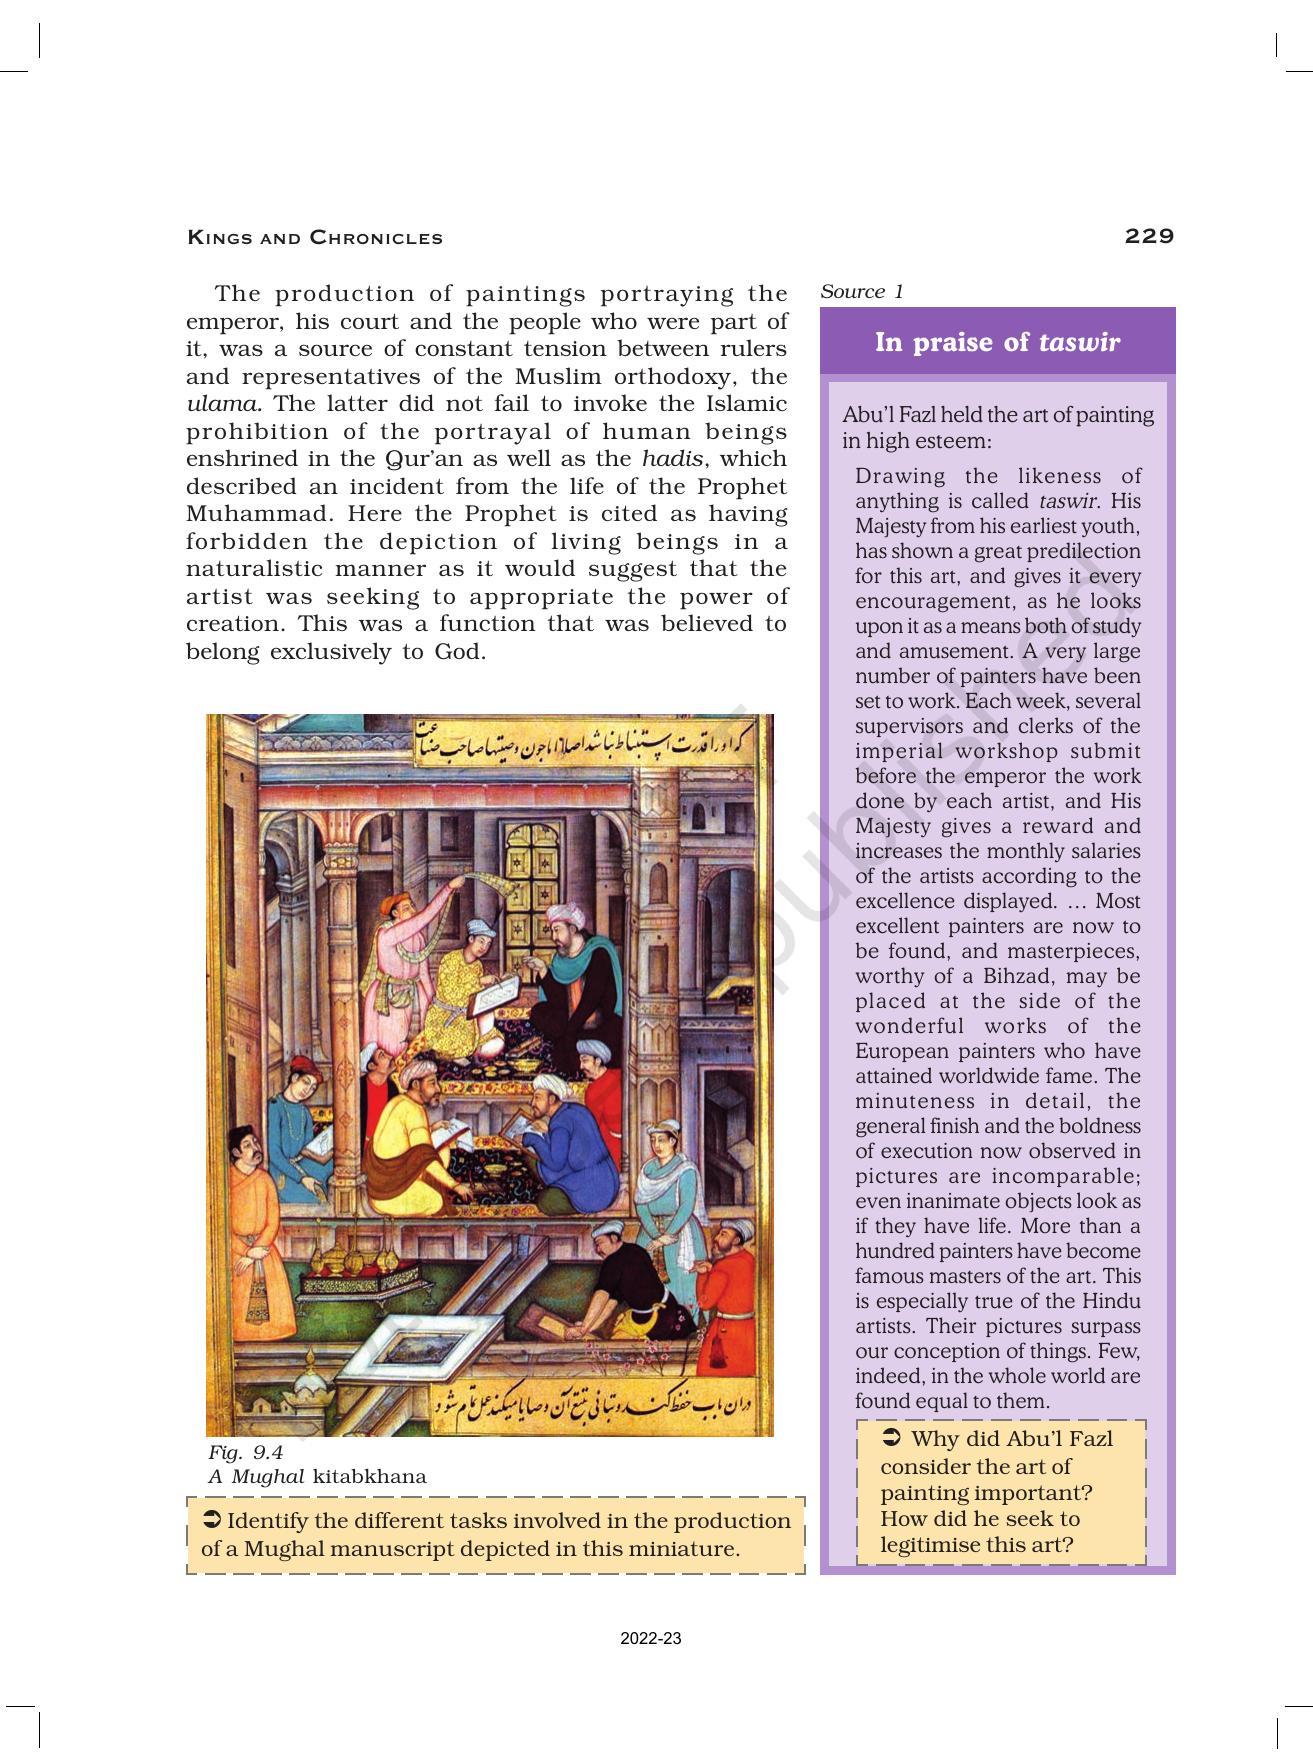 NCERT Book for Class 12 History (Part-II) Chapter 9 Kings and Chronicles - Page 6